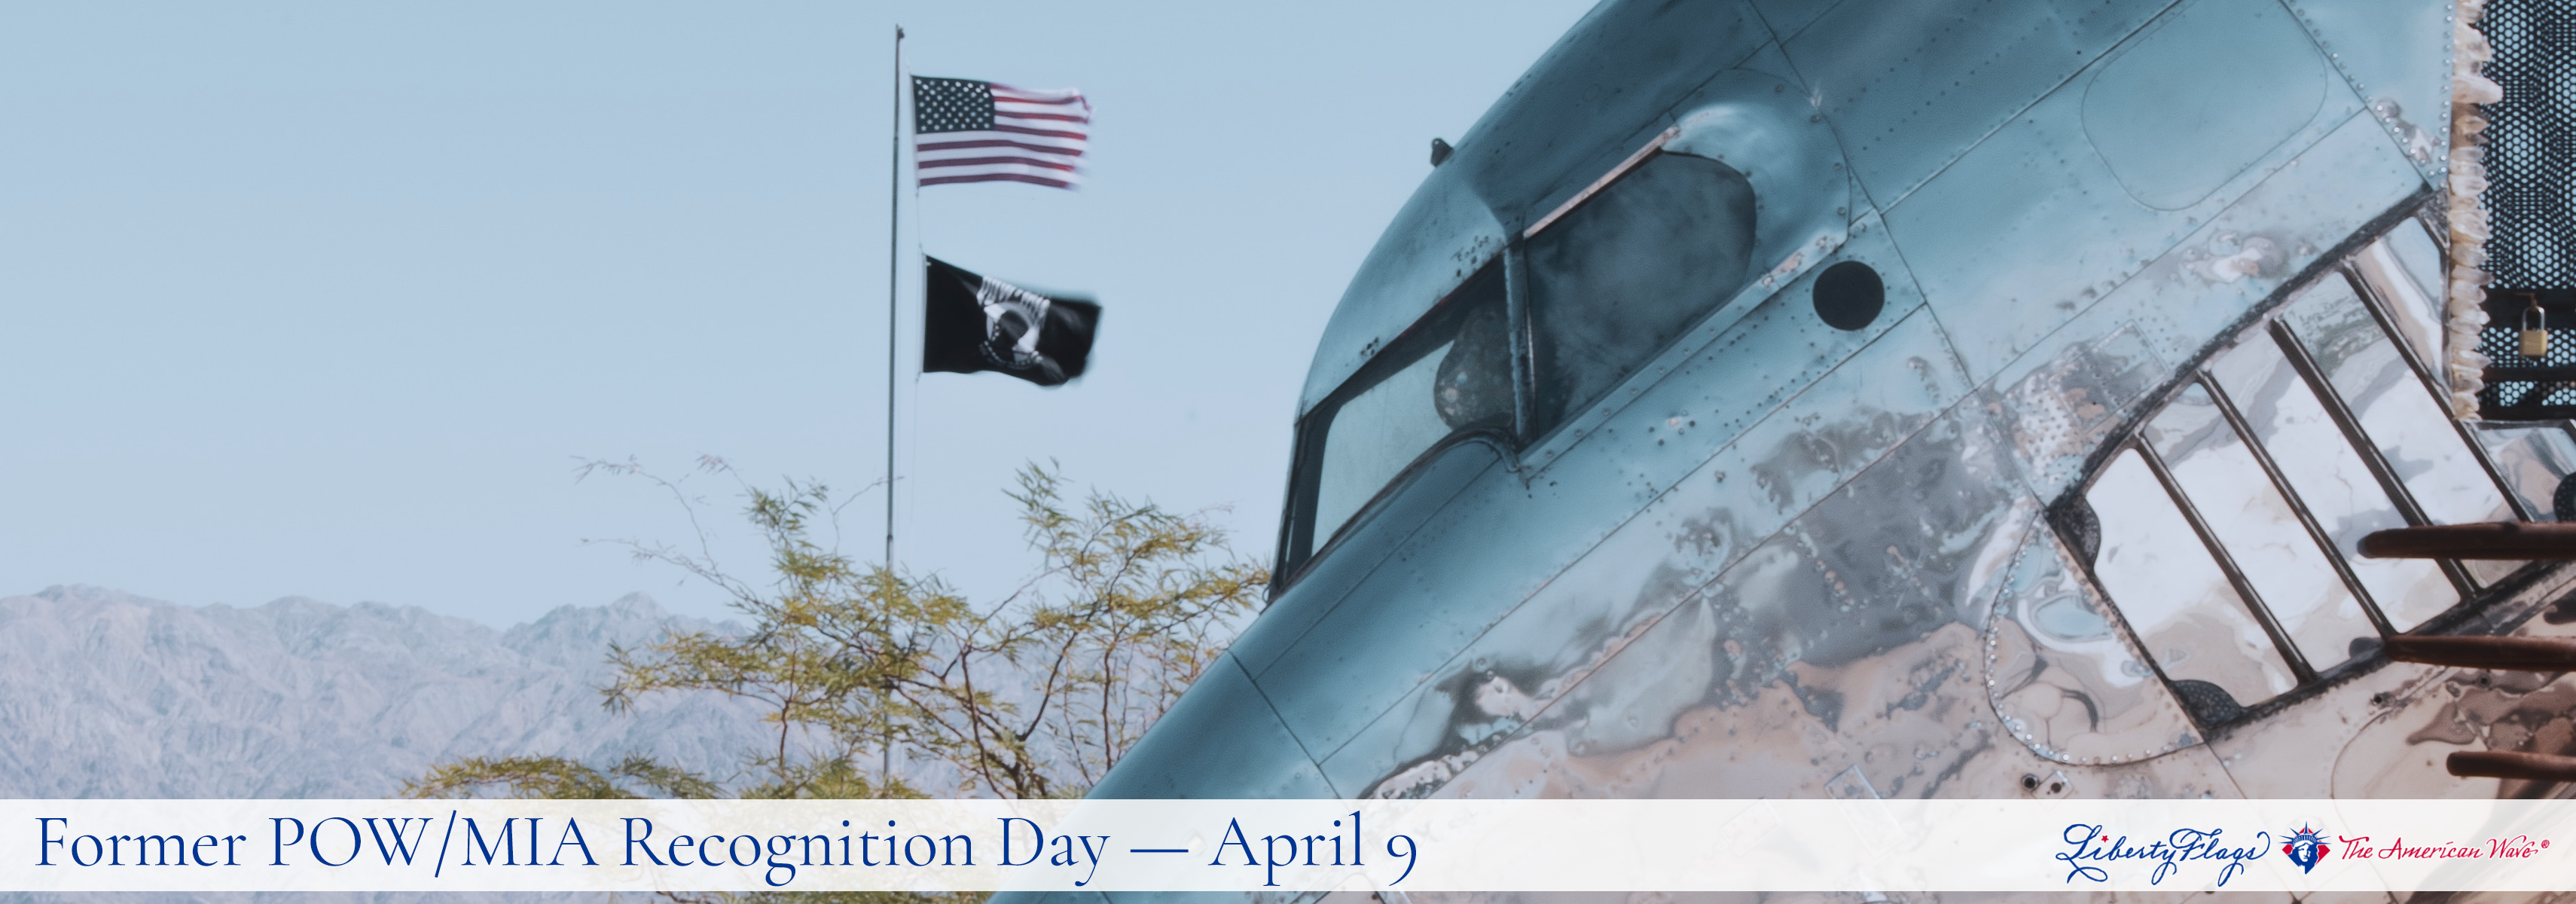 “Commemorating Former P.O.W. Day with LIBERTY FLAGS, The American Wave®